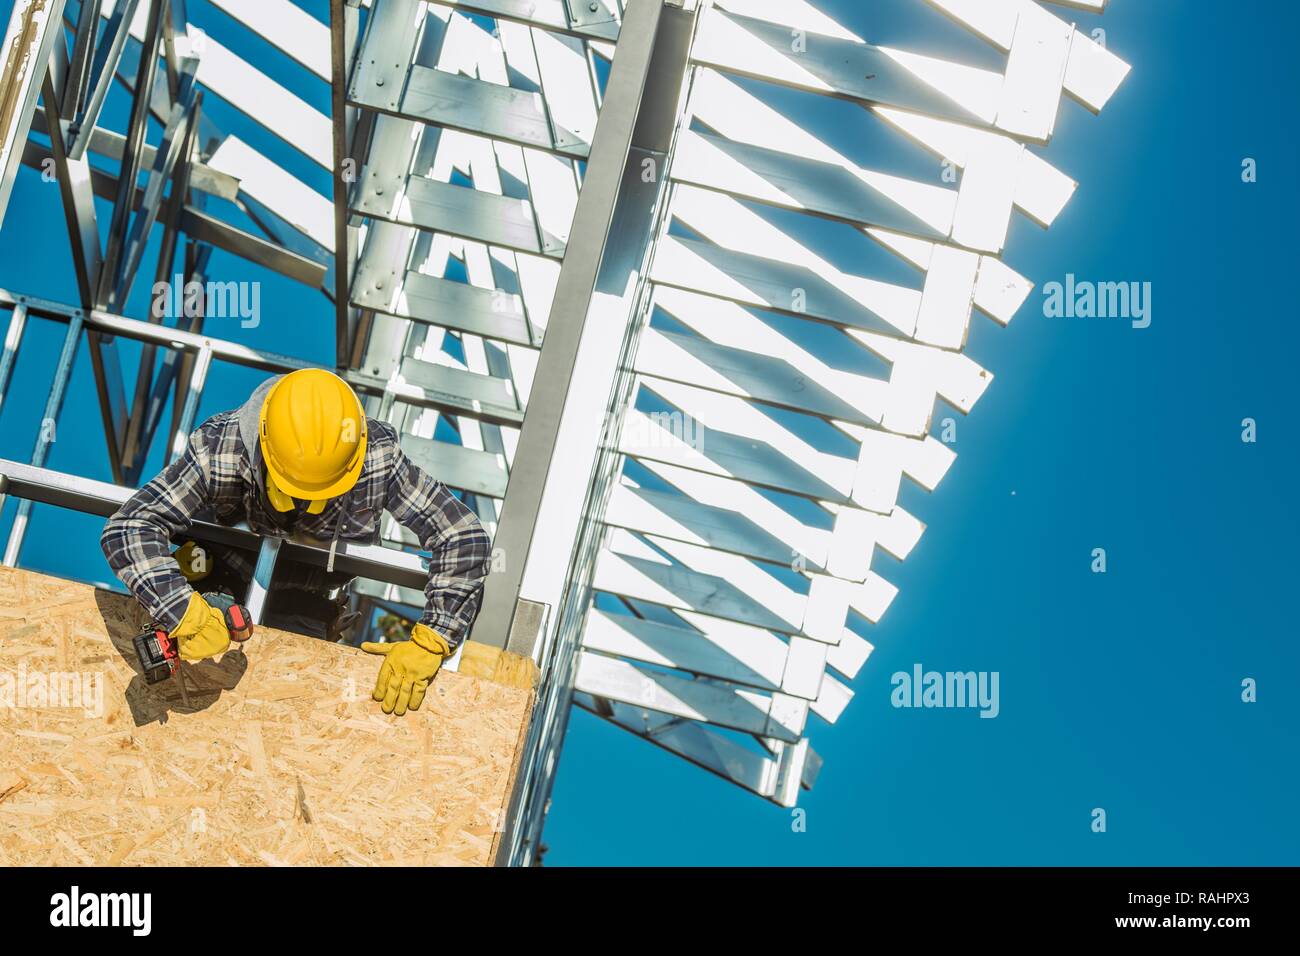 Skeleton Frame Home Construction Worker in Yellow Helmet Installing Metal Elements. Construction Industry Theme. Stock Photo